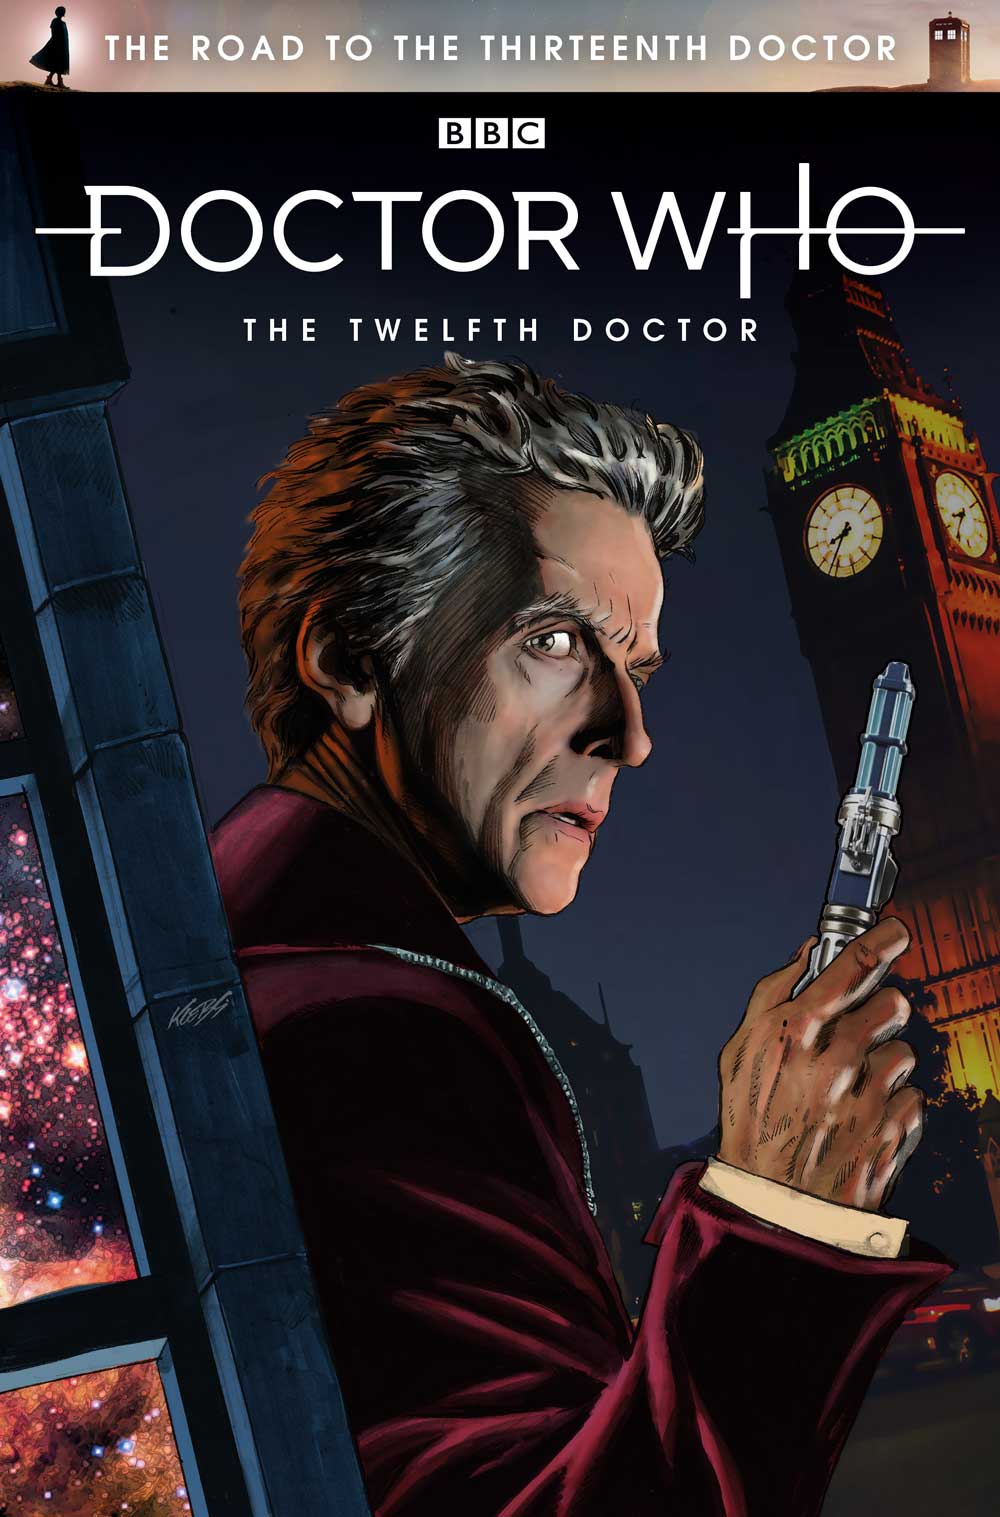 The Road To The Thirteenth Doctor - The Twelfth Doctor - Cover by Klebs Jr